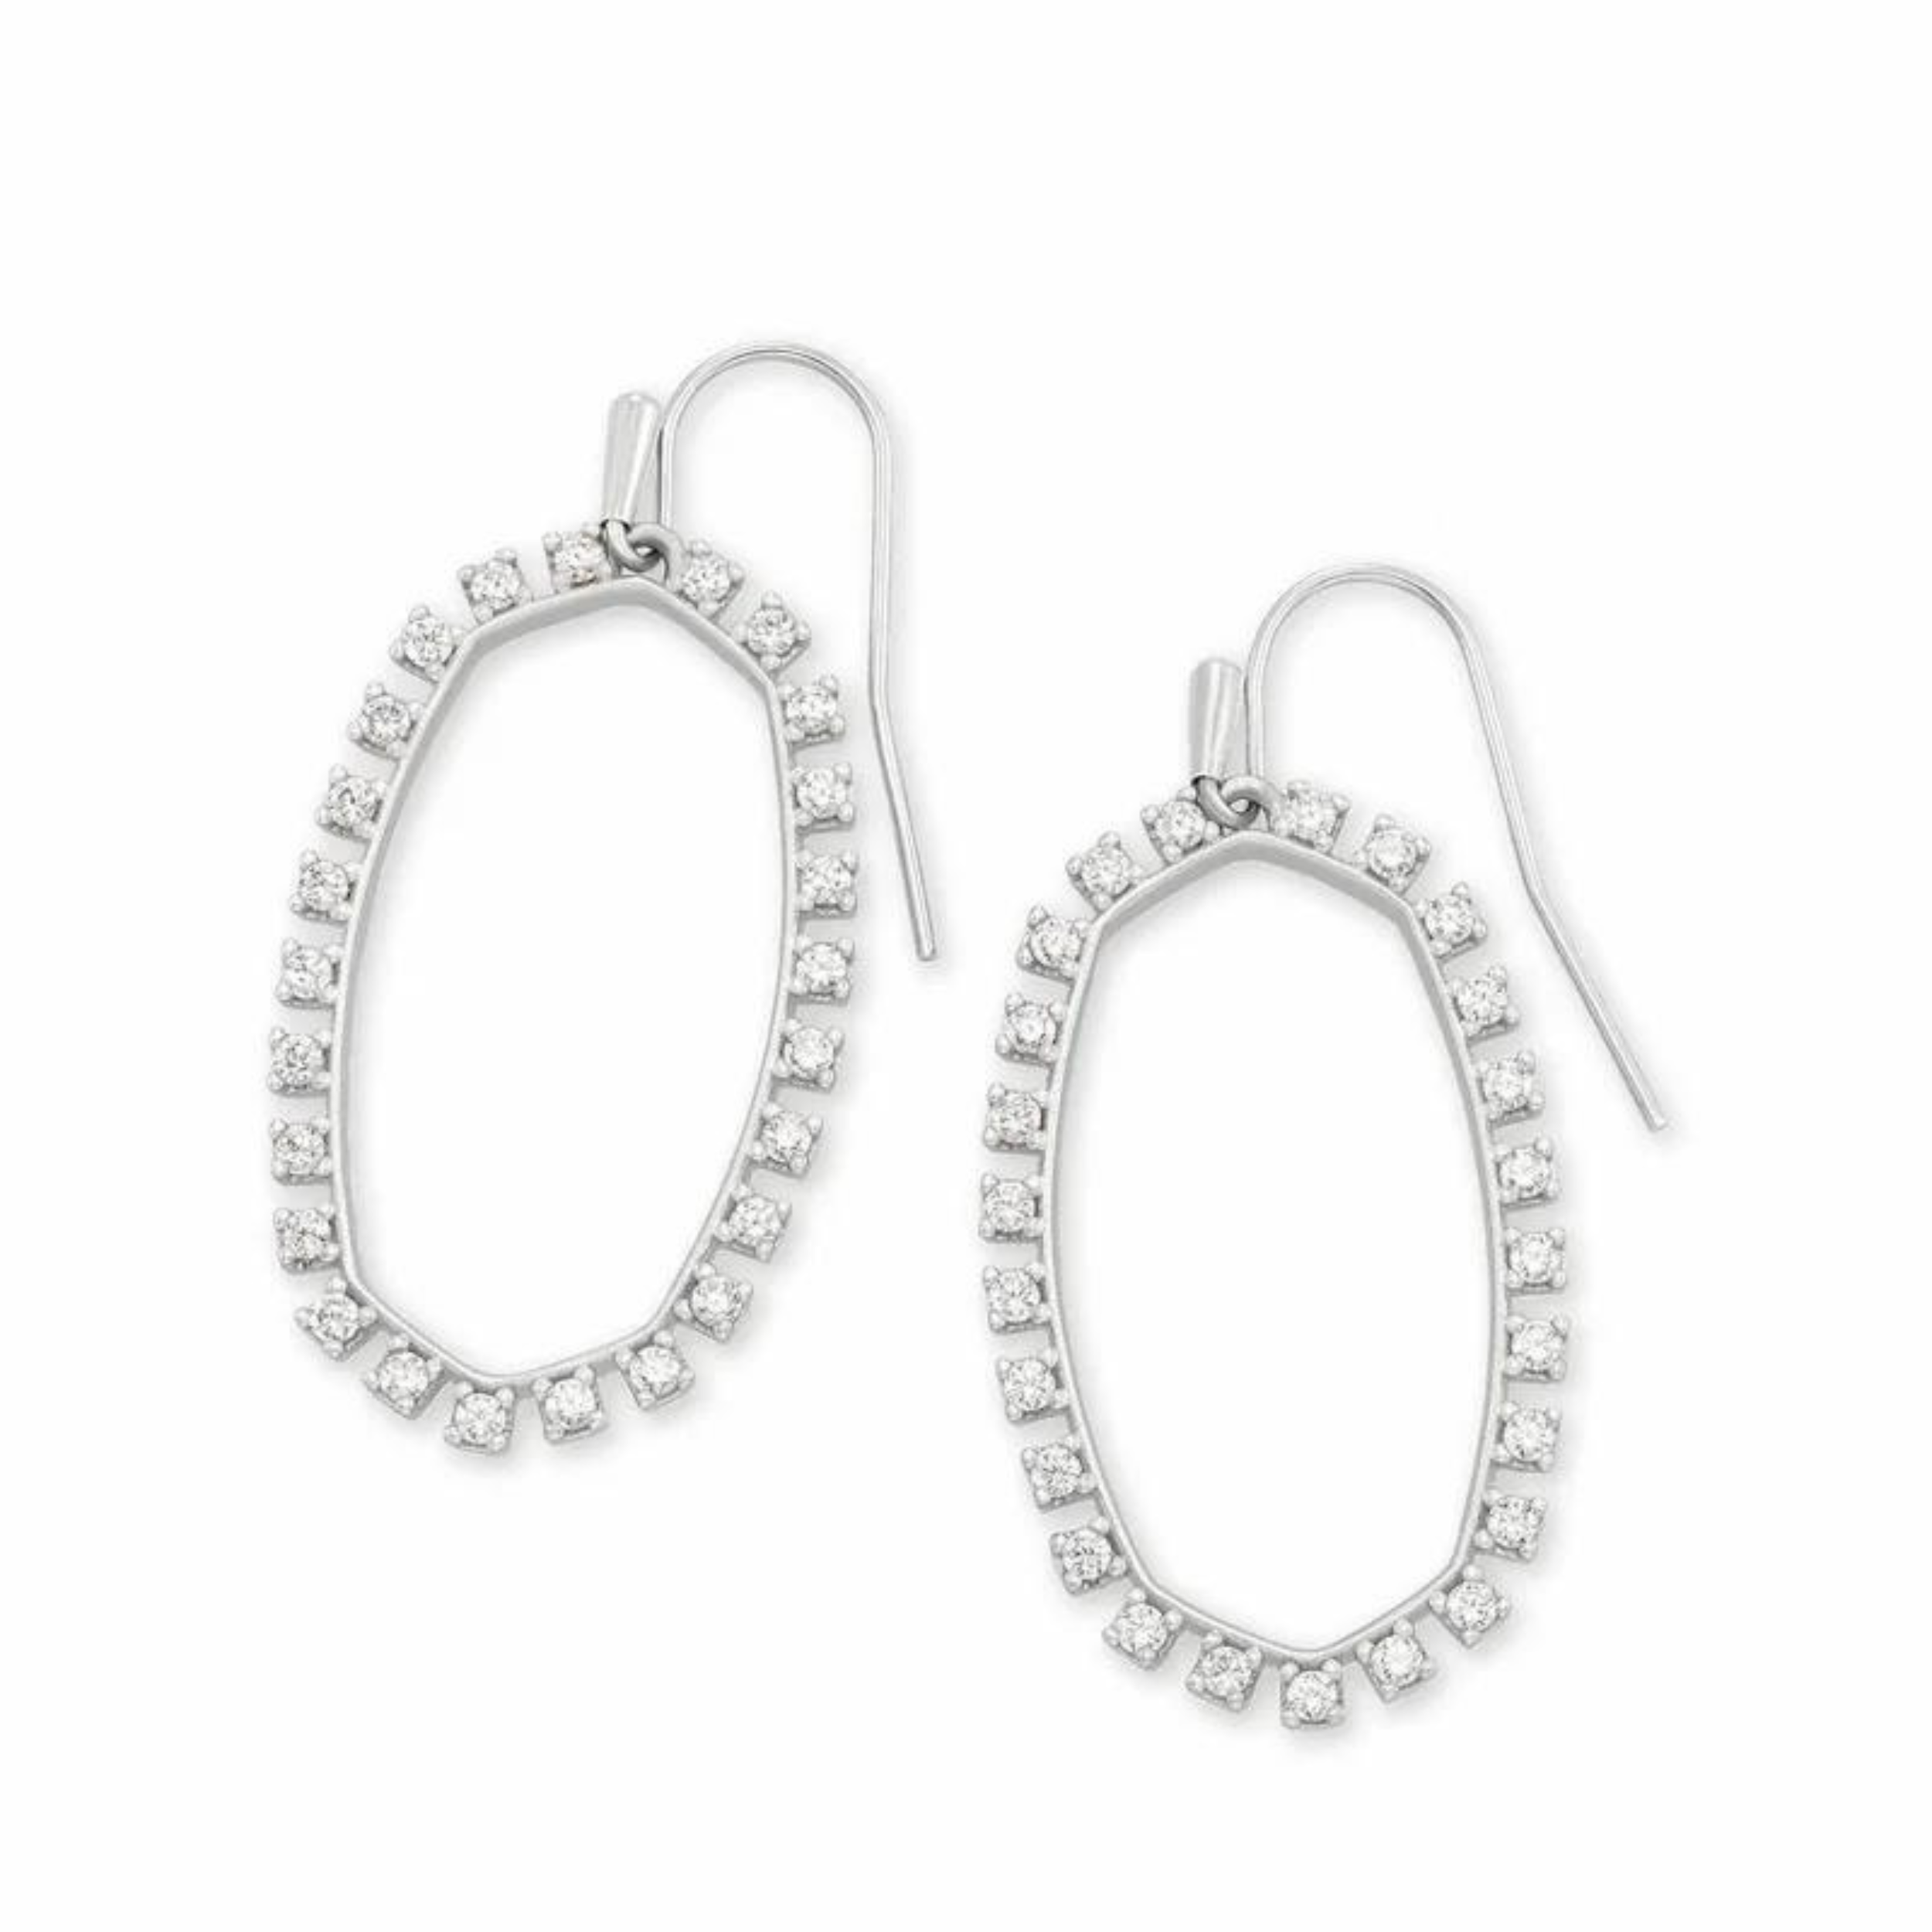 Silver crystal dangle earrings, pictured on a white background.